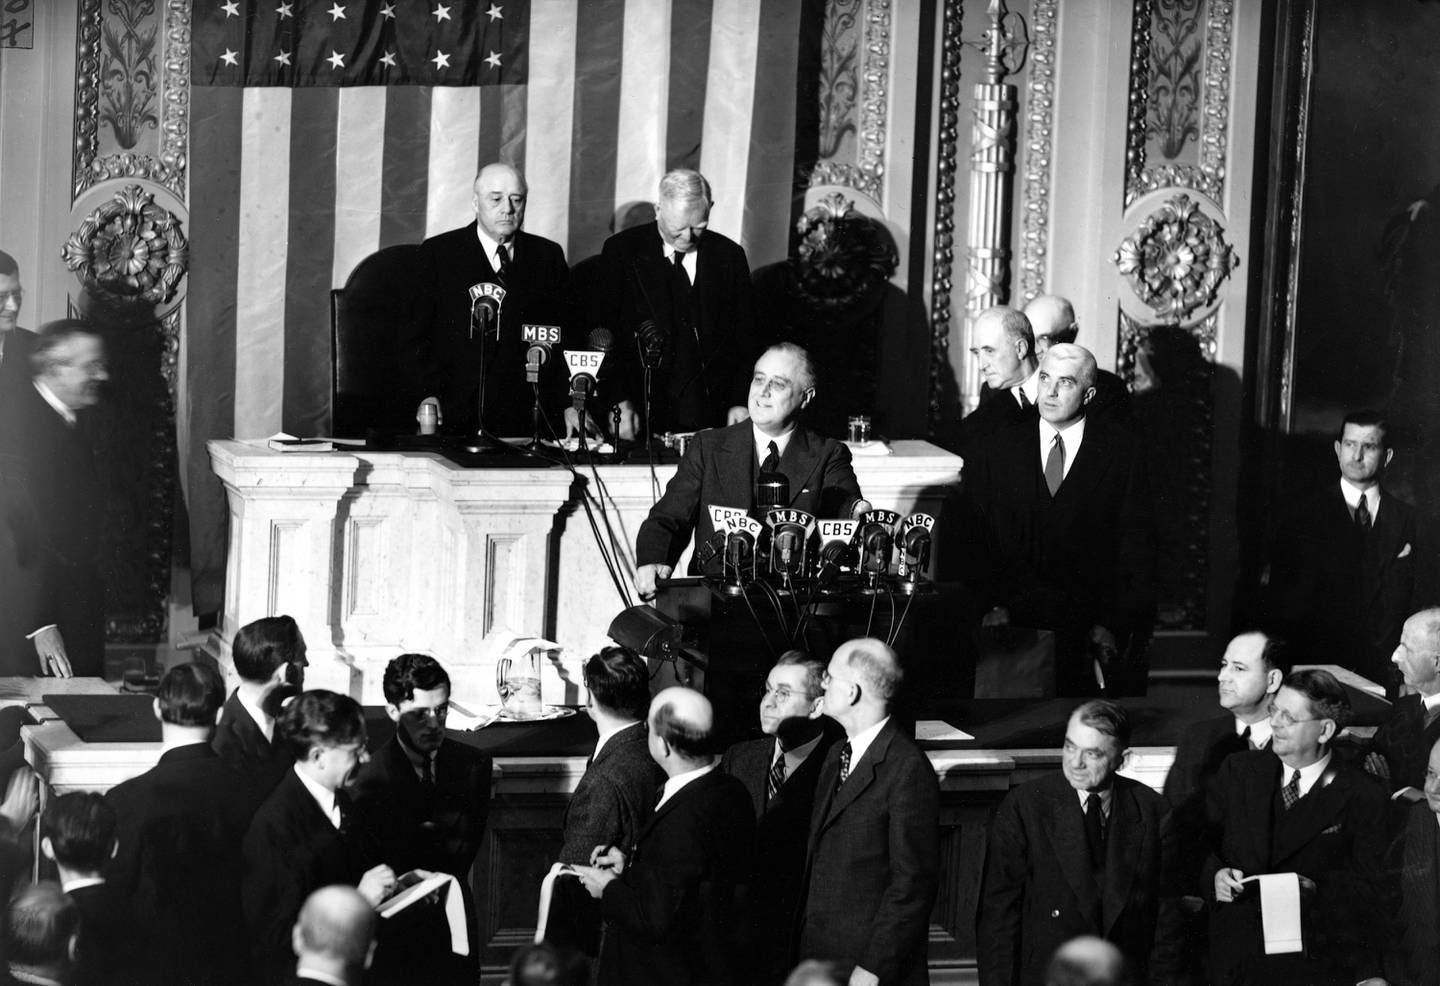 U.S. President Franklin Roosevelt is shown at the rostrum during the first joint session of the 77th Congress for the annual message in Washington, D.C., Jan. 6, 1941.  Standing behind the president are, Vice President John N. Garner, left, and House Speaker Sam Rayburn.  President Roosevelt pleaded for an increase in production of armaments for defense and aid to the fighting democracies.  (AP Photo)